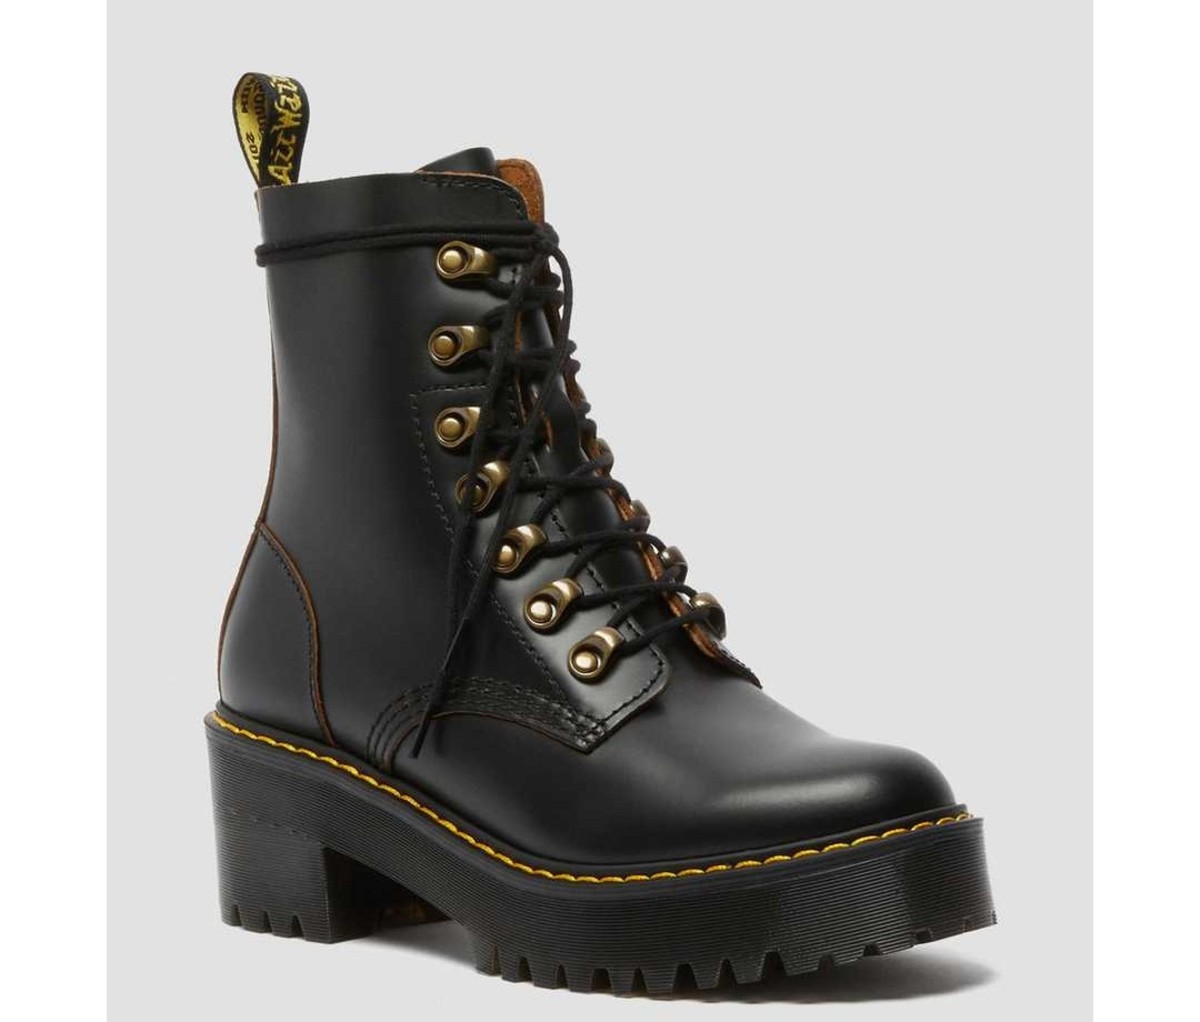 Dr. Martens Leona Women's Vintage Smooth Leather Heeled Boots